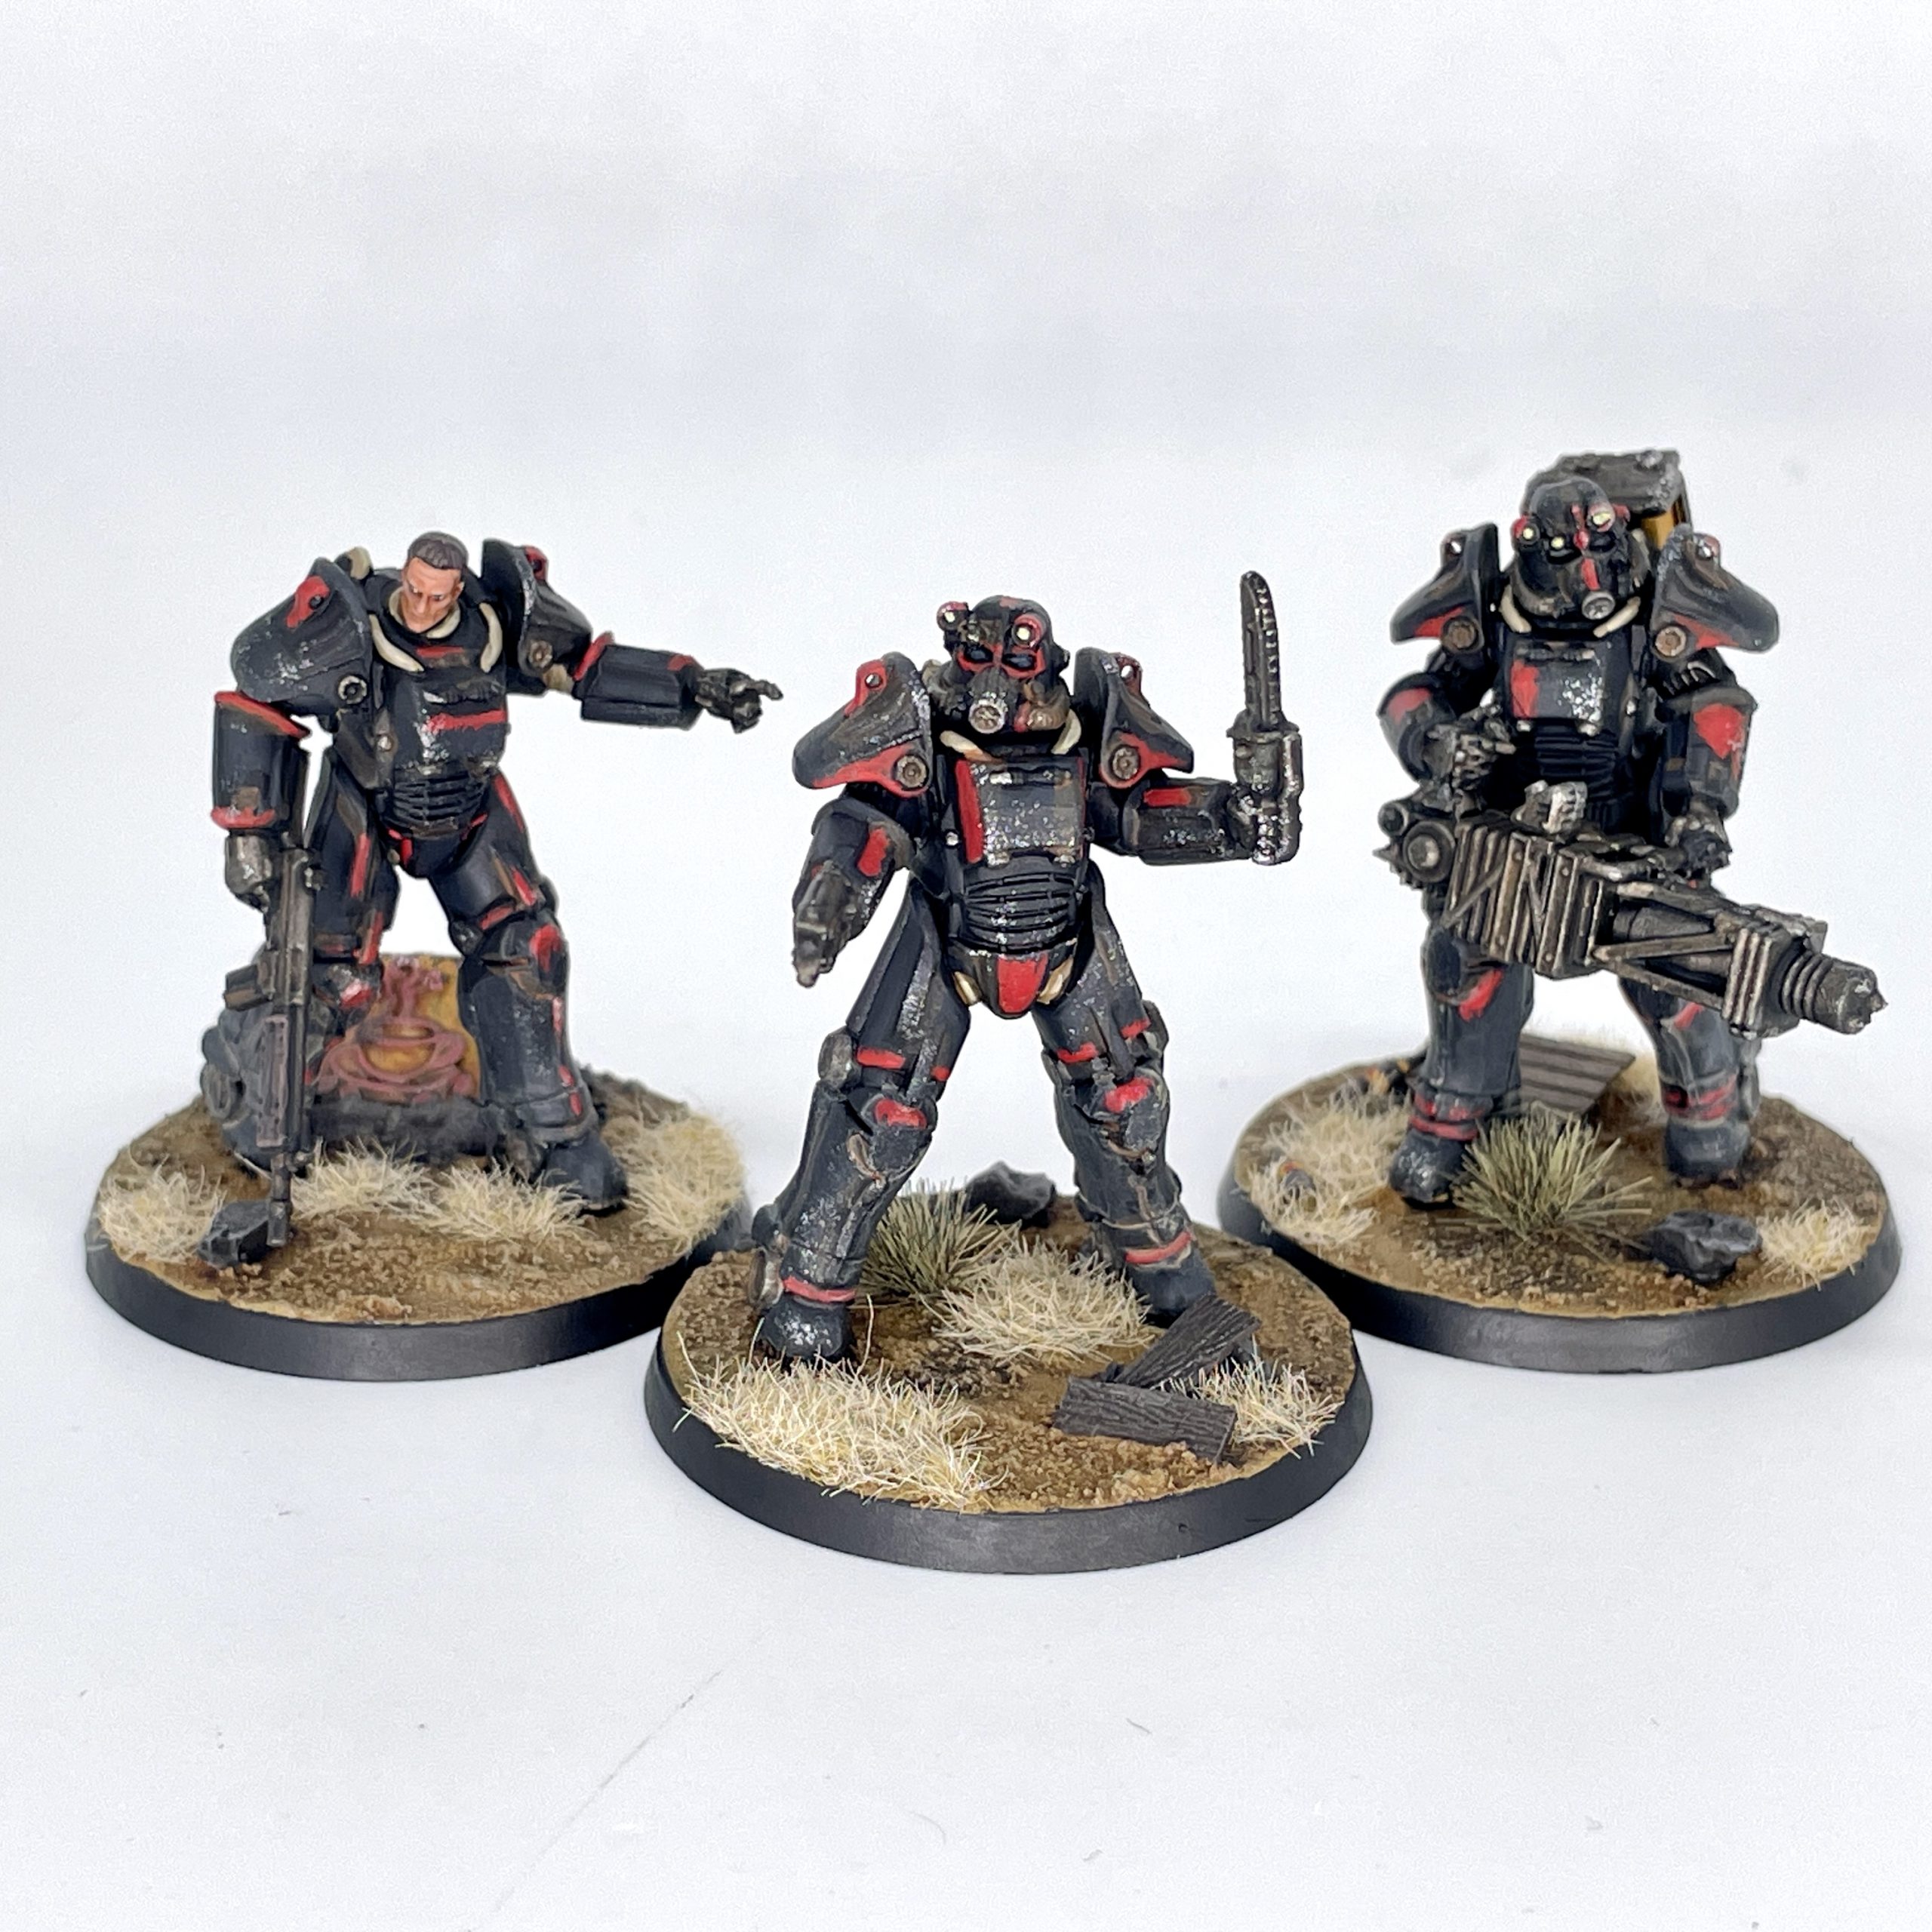 First painted miniatures and question on basing : r/battletech